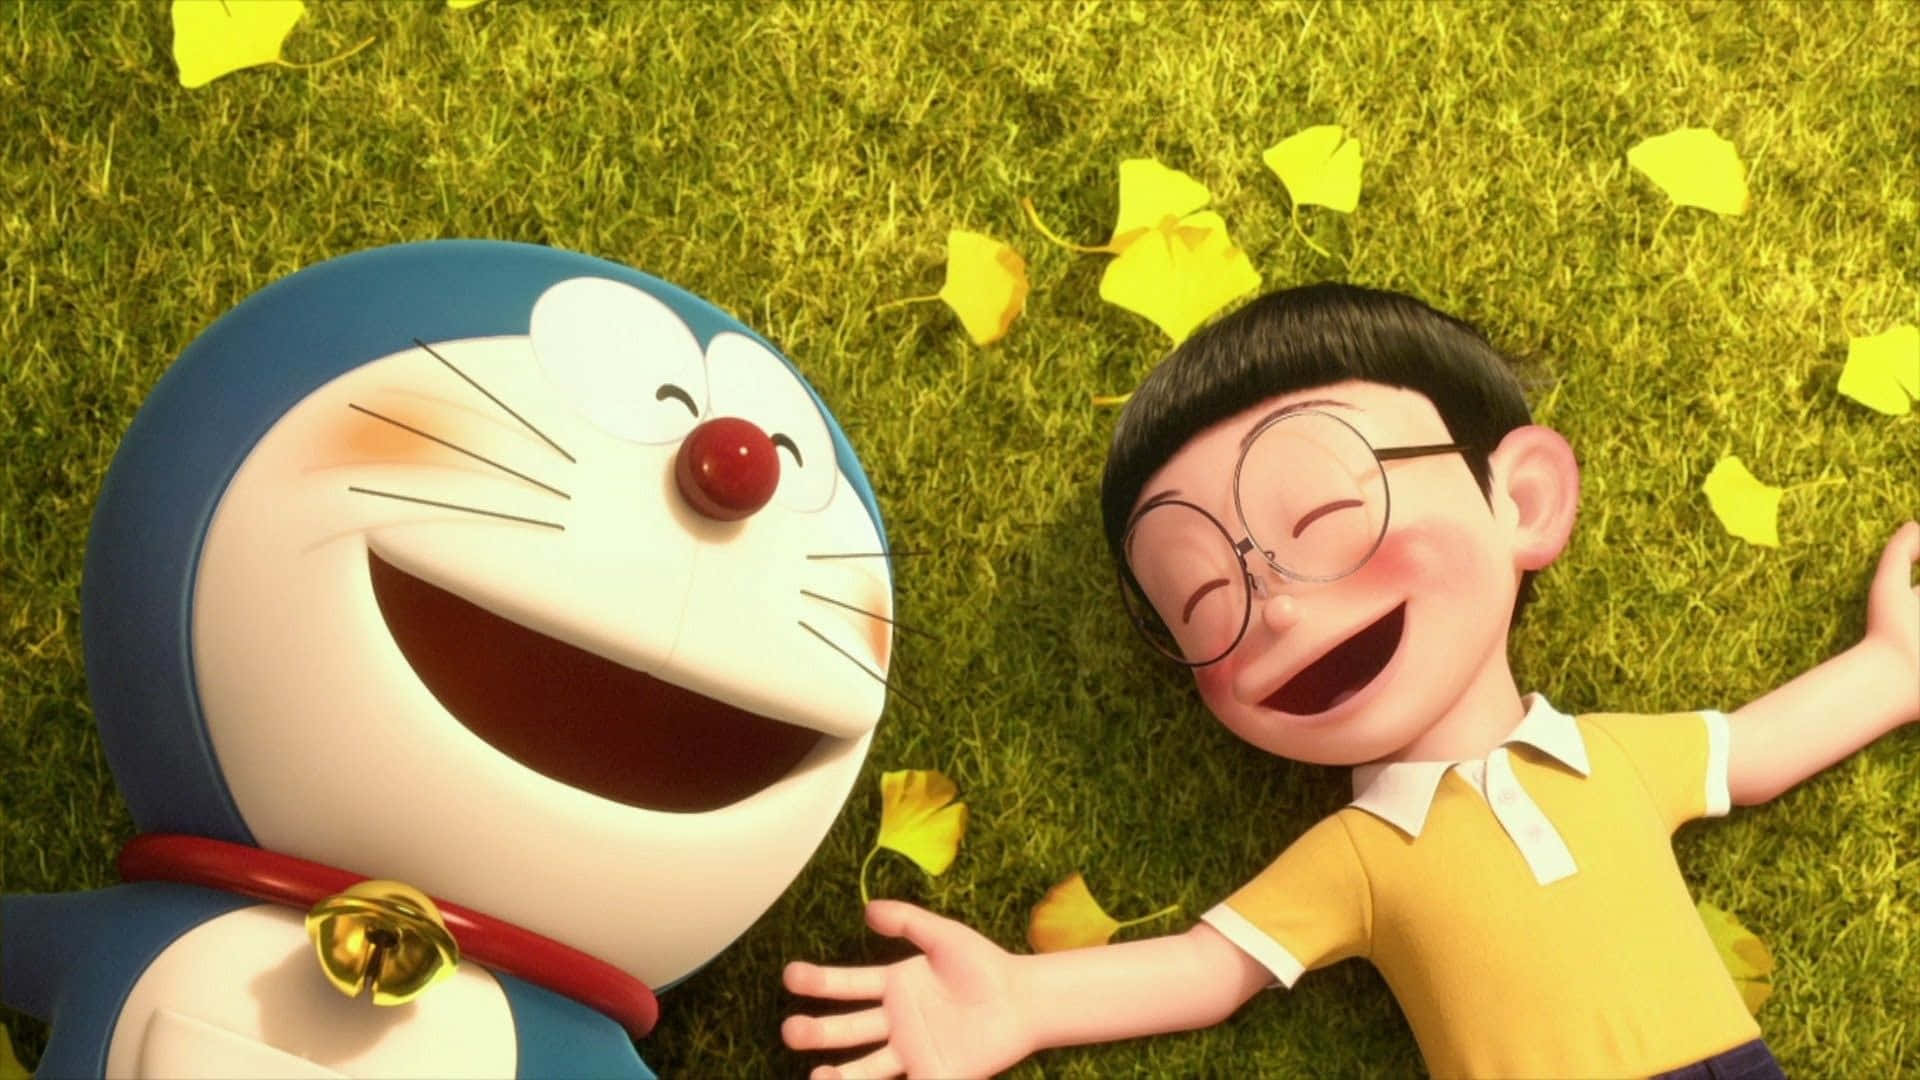 Doraemon - A Boy And A Girl Laying On The Grass